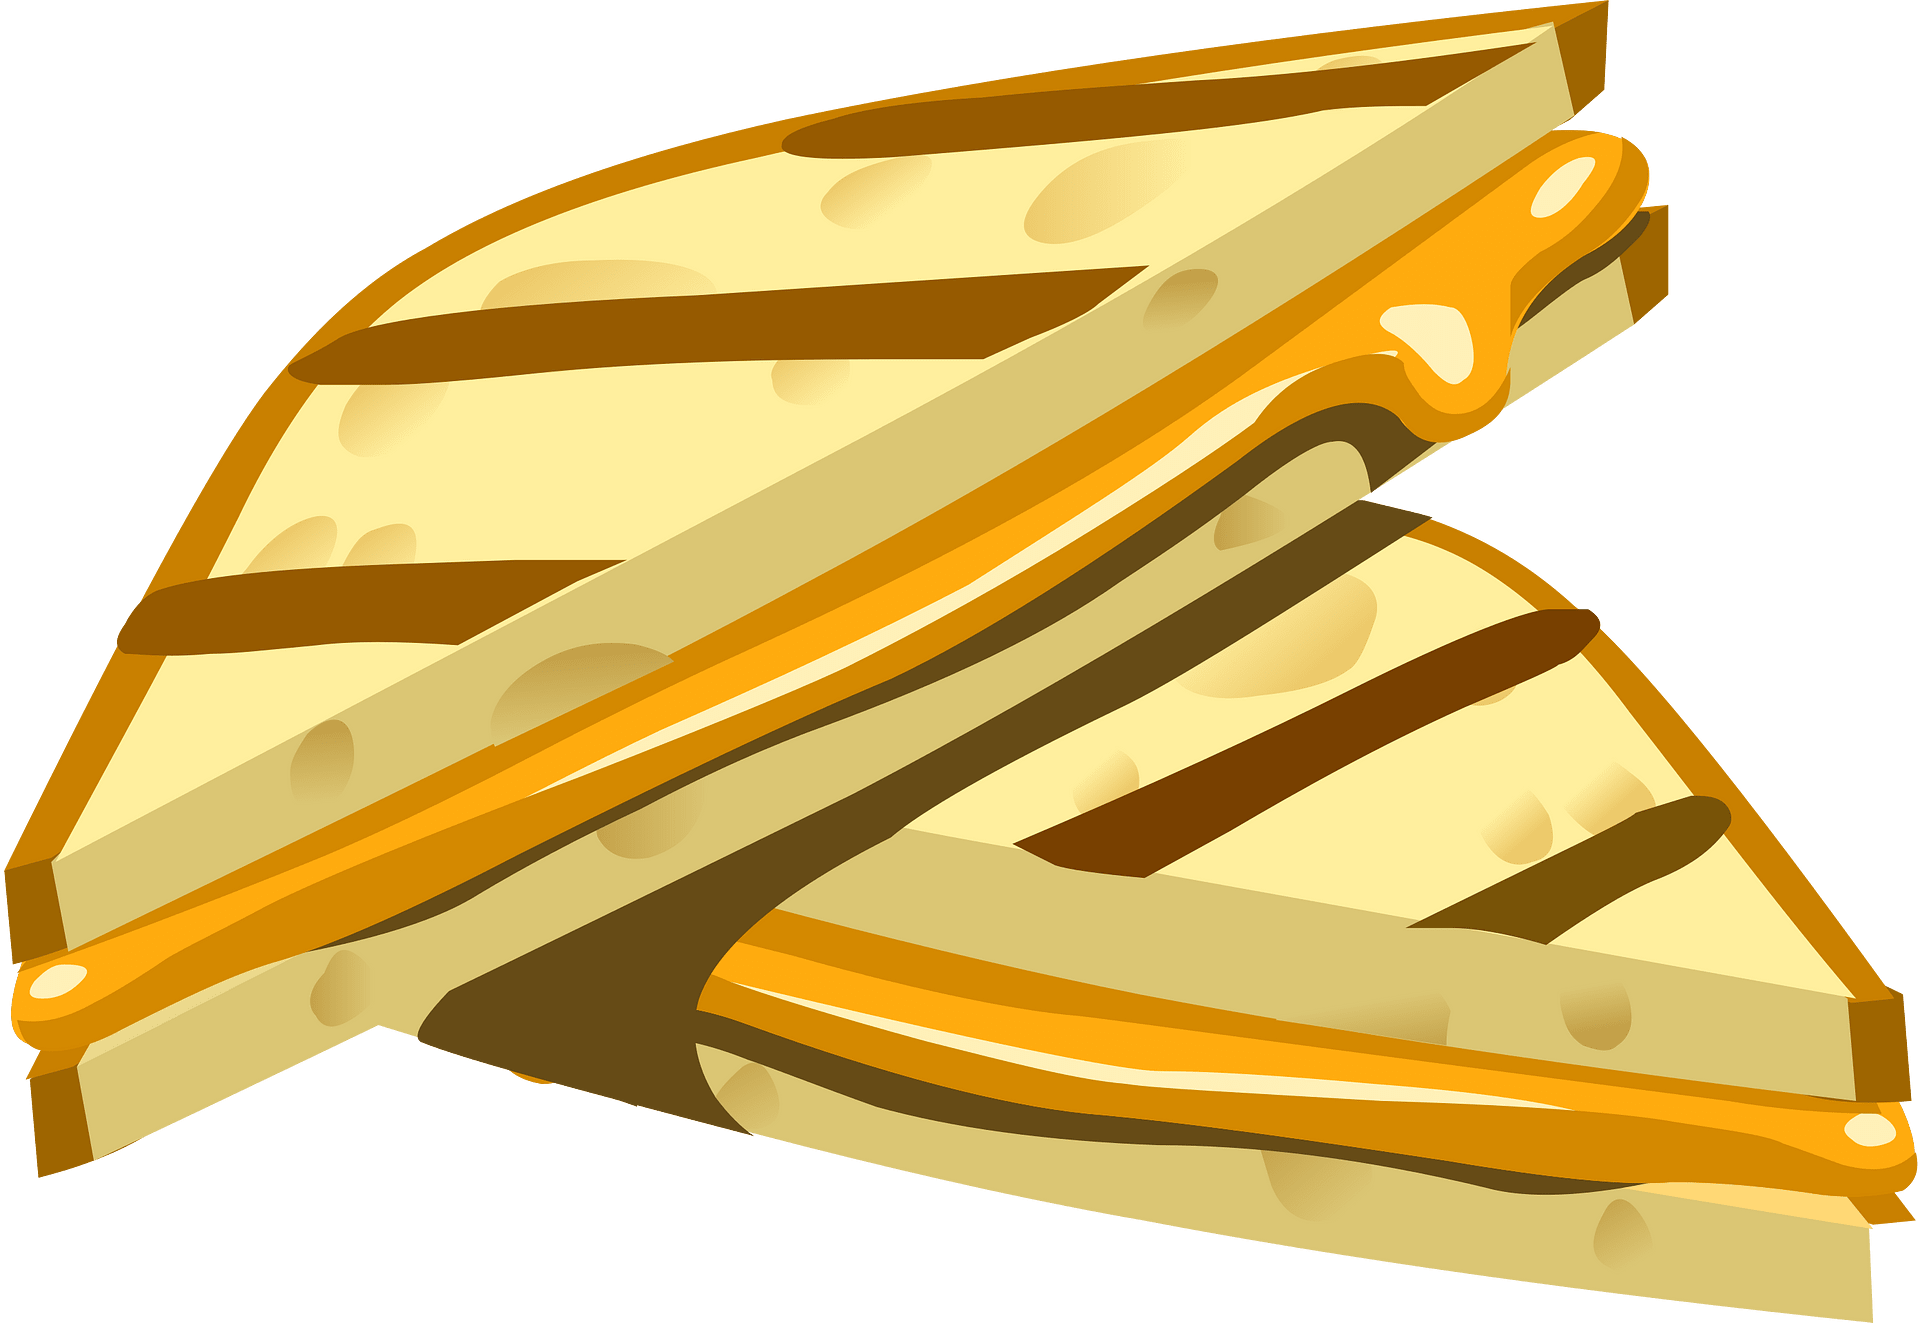 Grilled Cheese - A Cartoon Illustration Of A Grilled Cheese - Clip Art ...